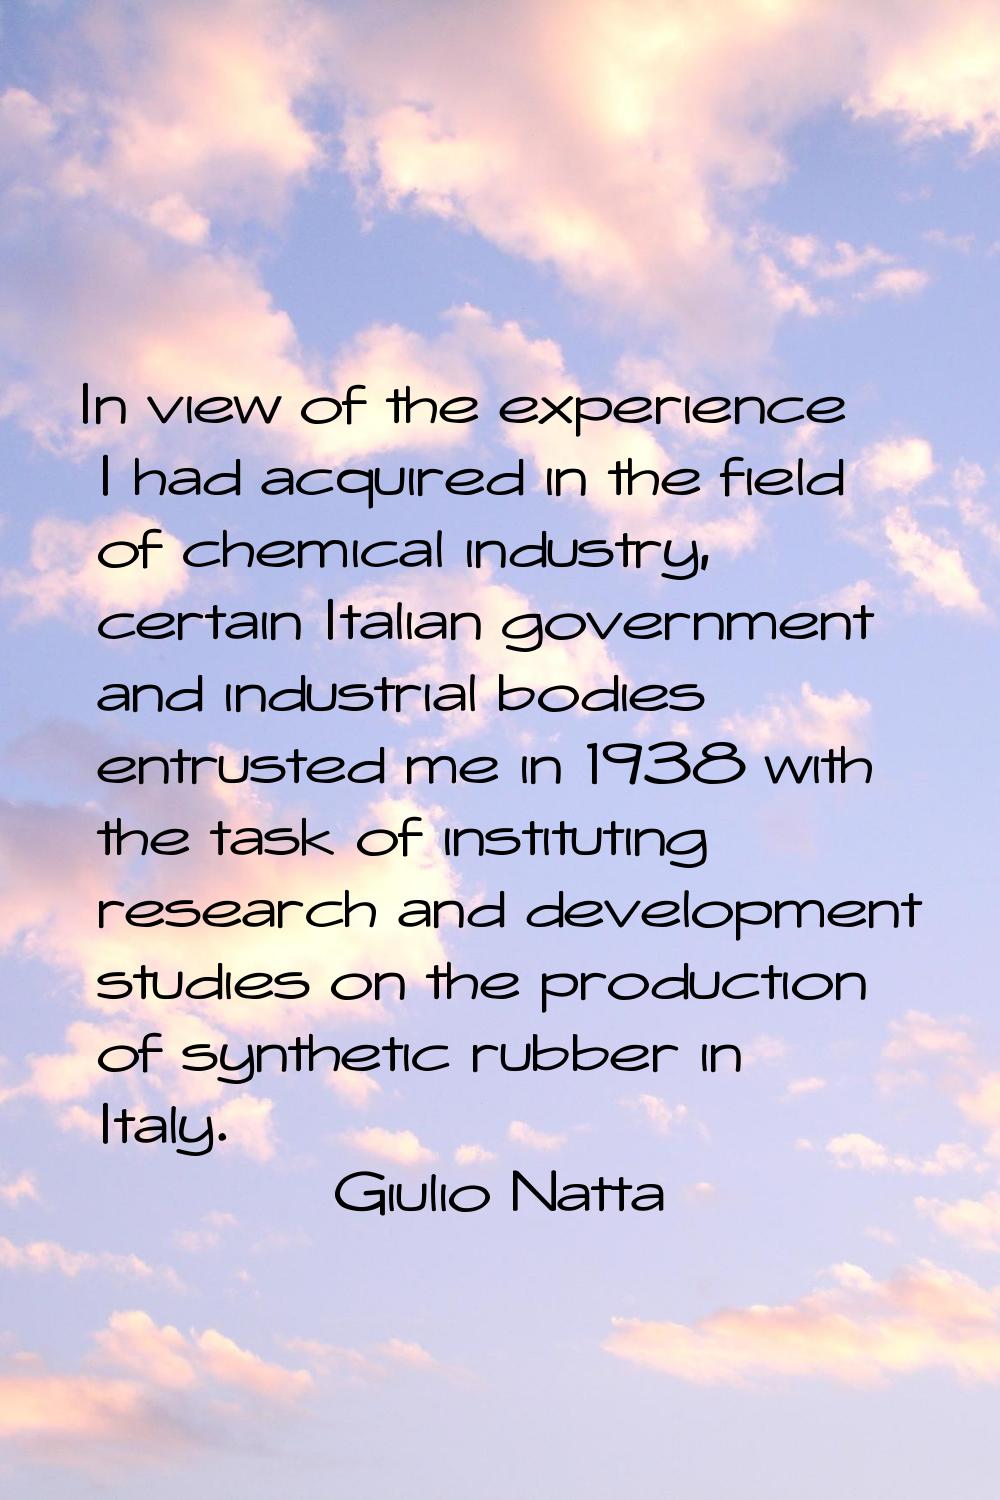 In view of the experience I had acquired in the field of chemical industry, certain Italian governm